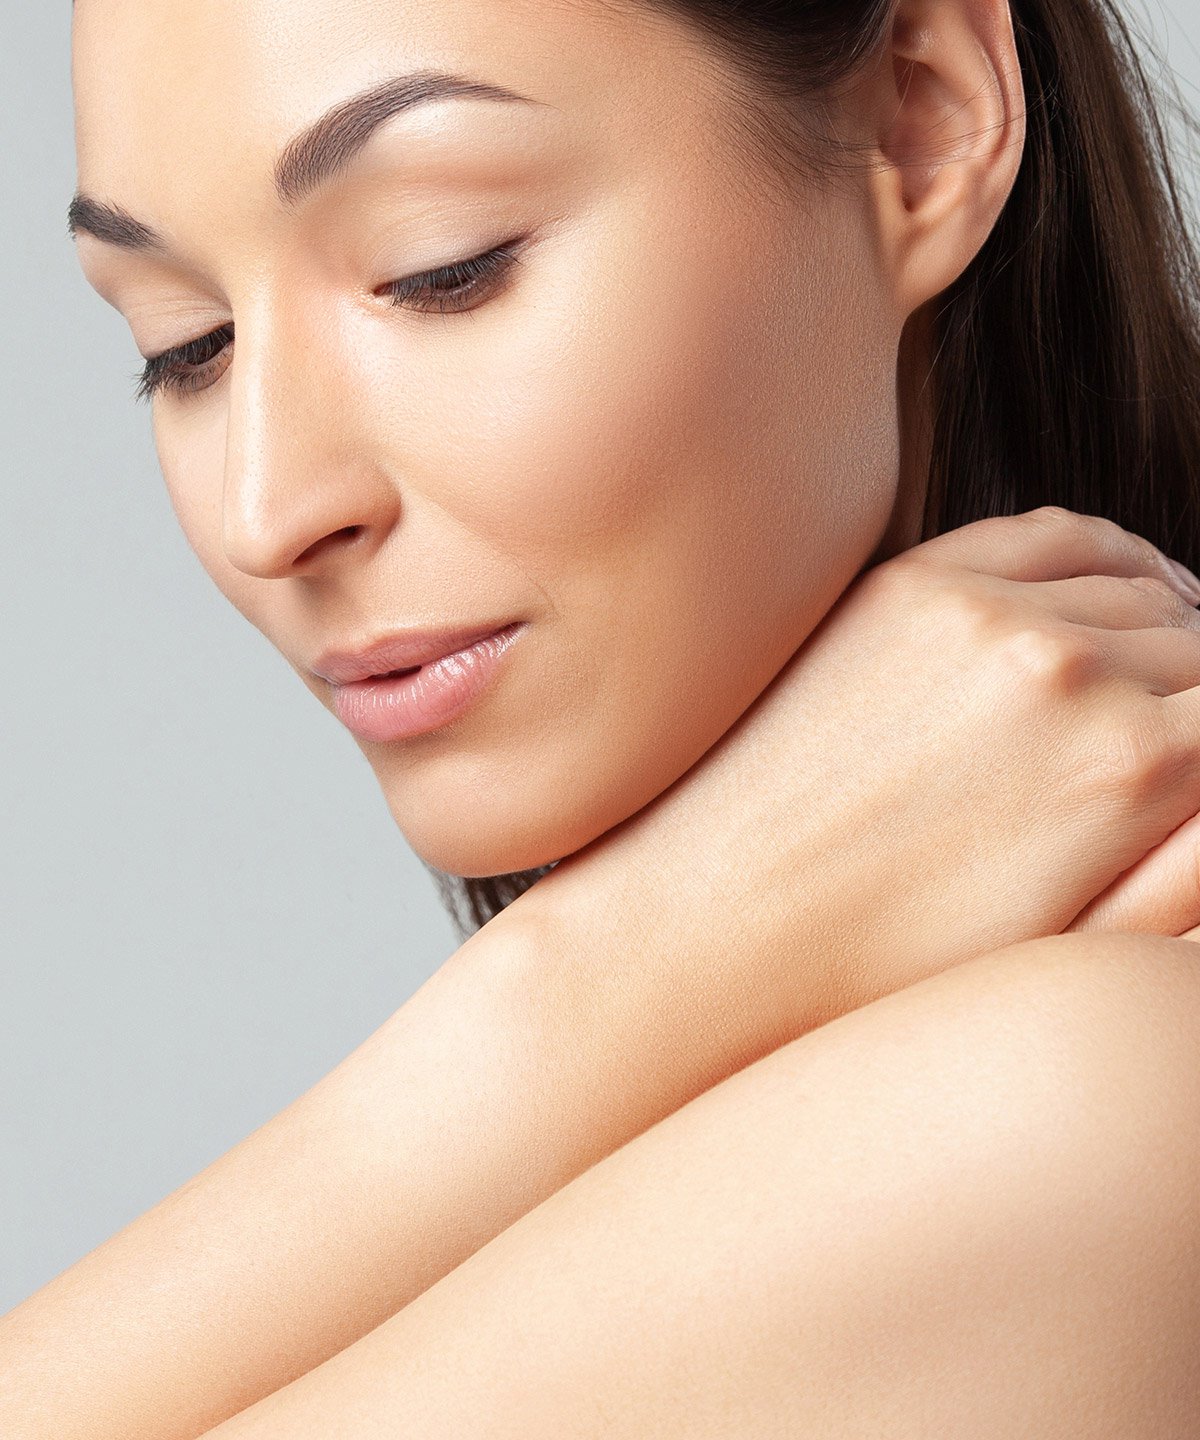 Female microneedling patient resting head on her arm